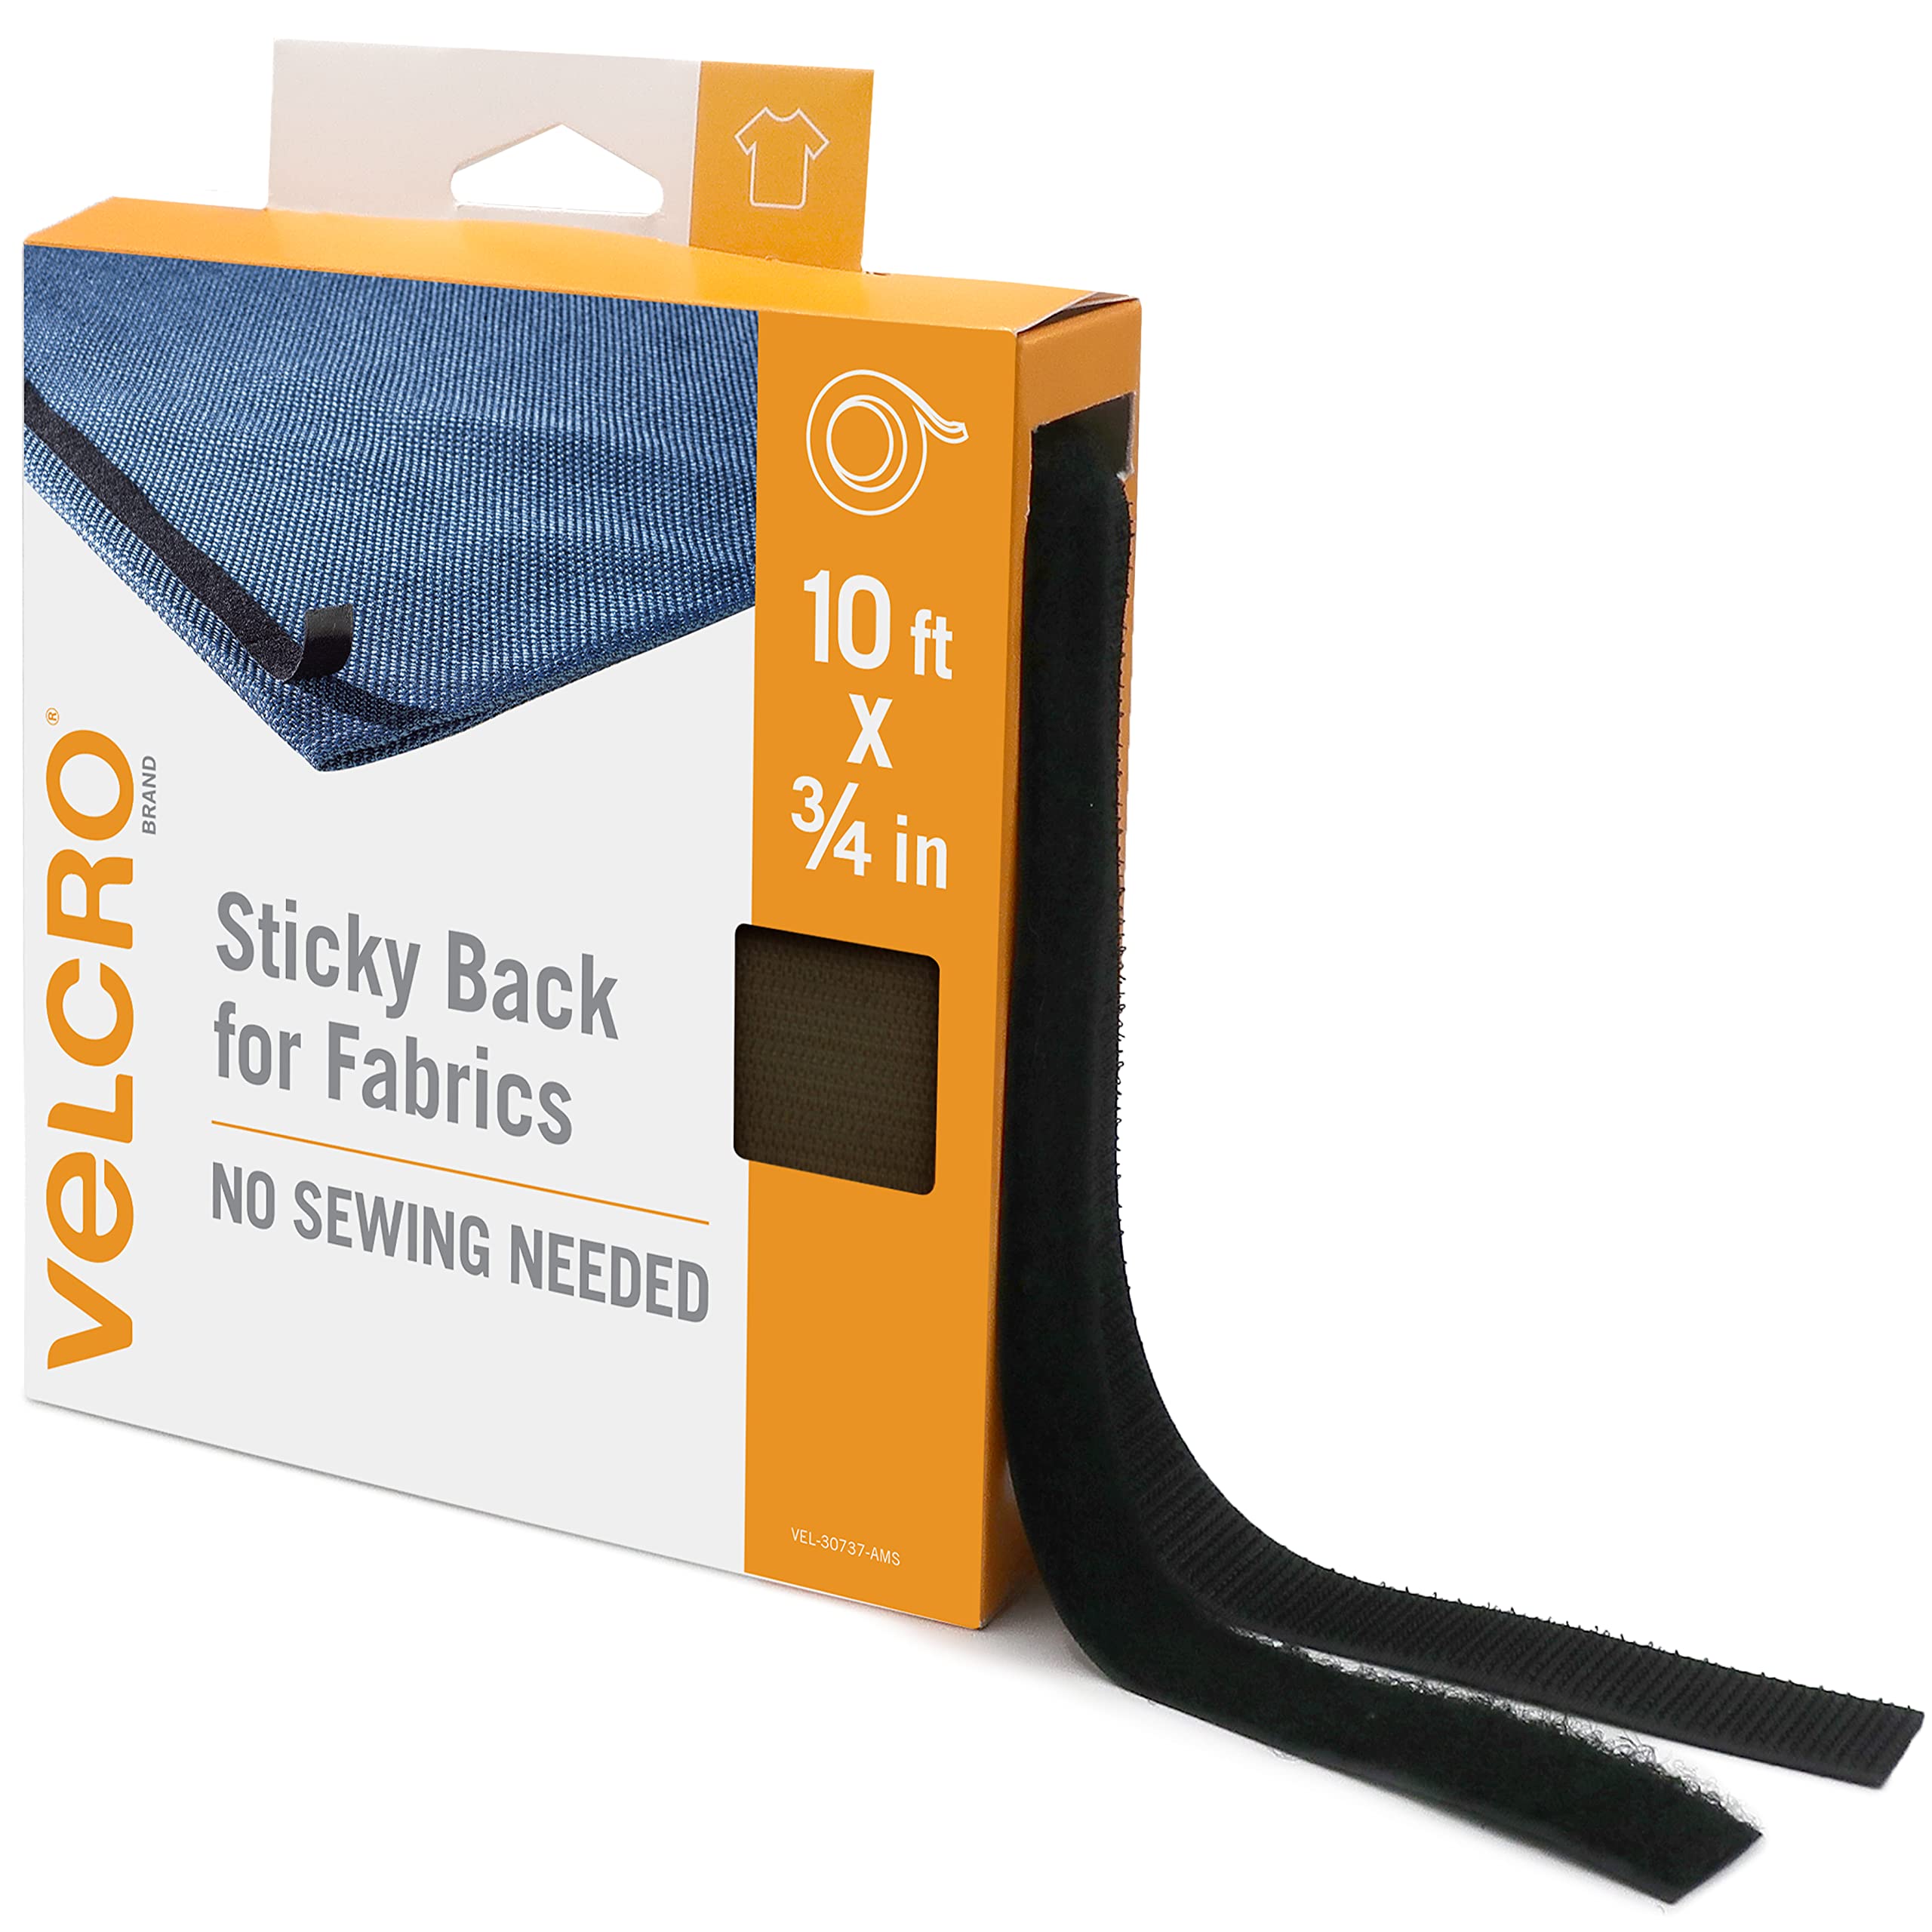 VELCRO Brand Sticky Back for Fabrics, 10 Ft Bulk Roll No Sew Tape with Adhesive, Cut Strips to Length Peel and Stick Bond to Clothing for Hemming Replace Zippers and Snaps, Black